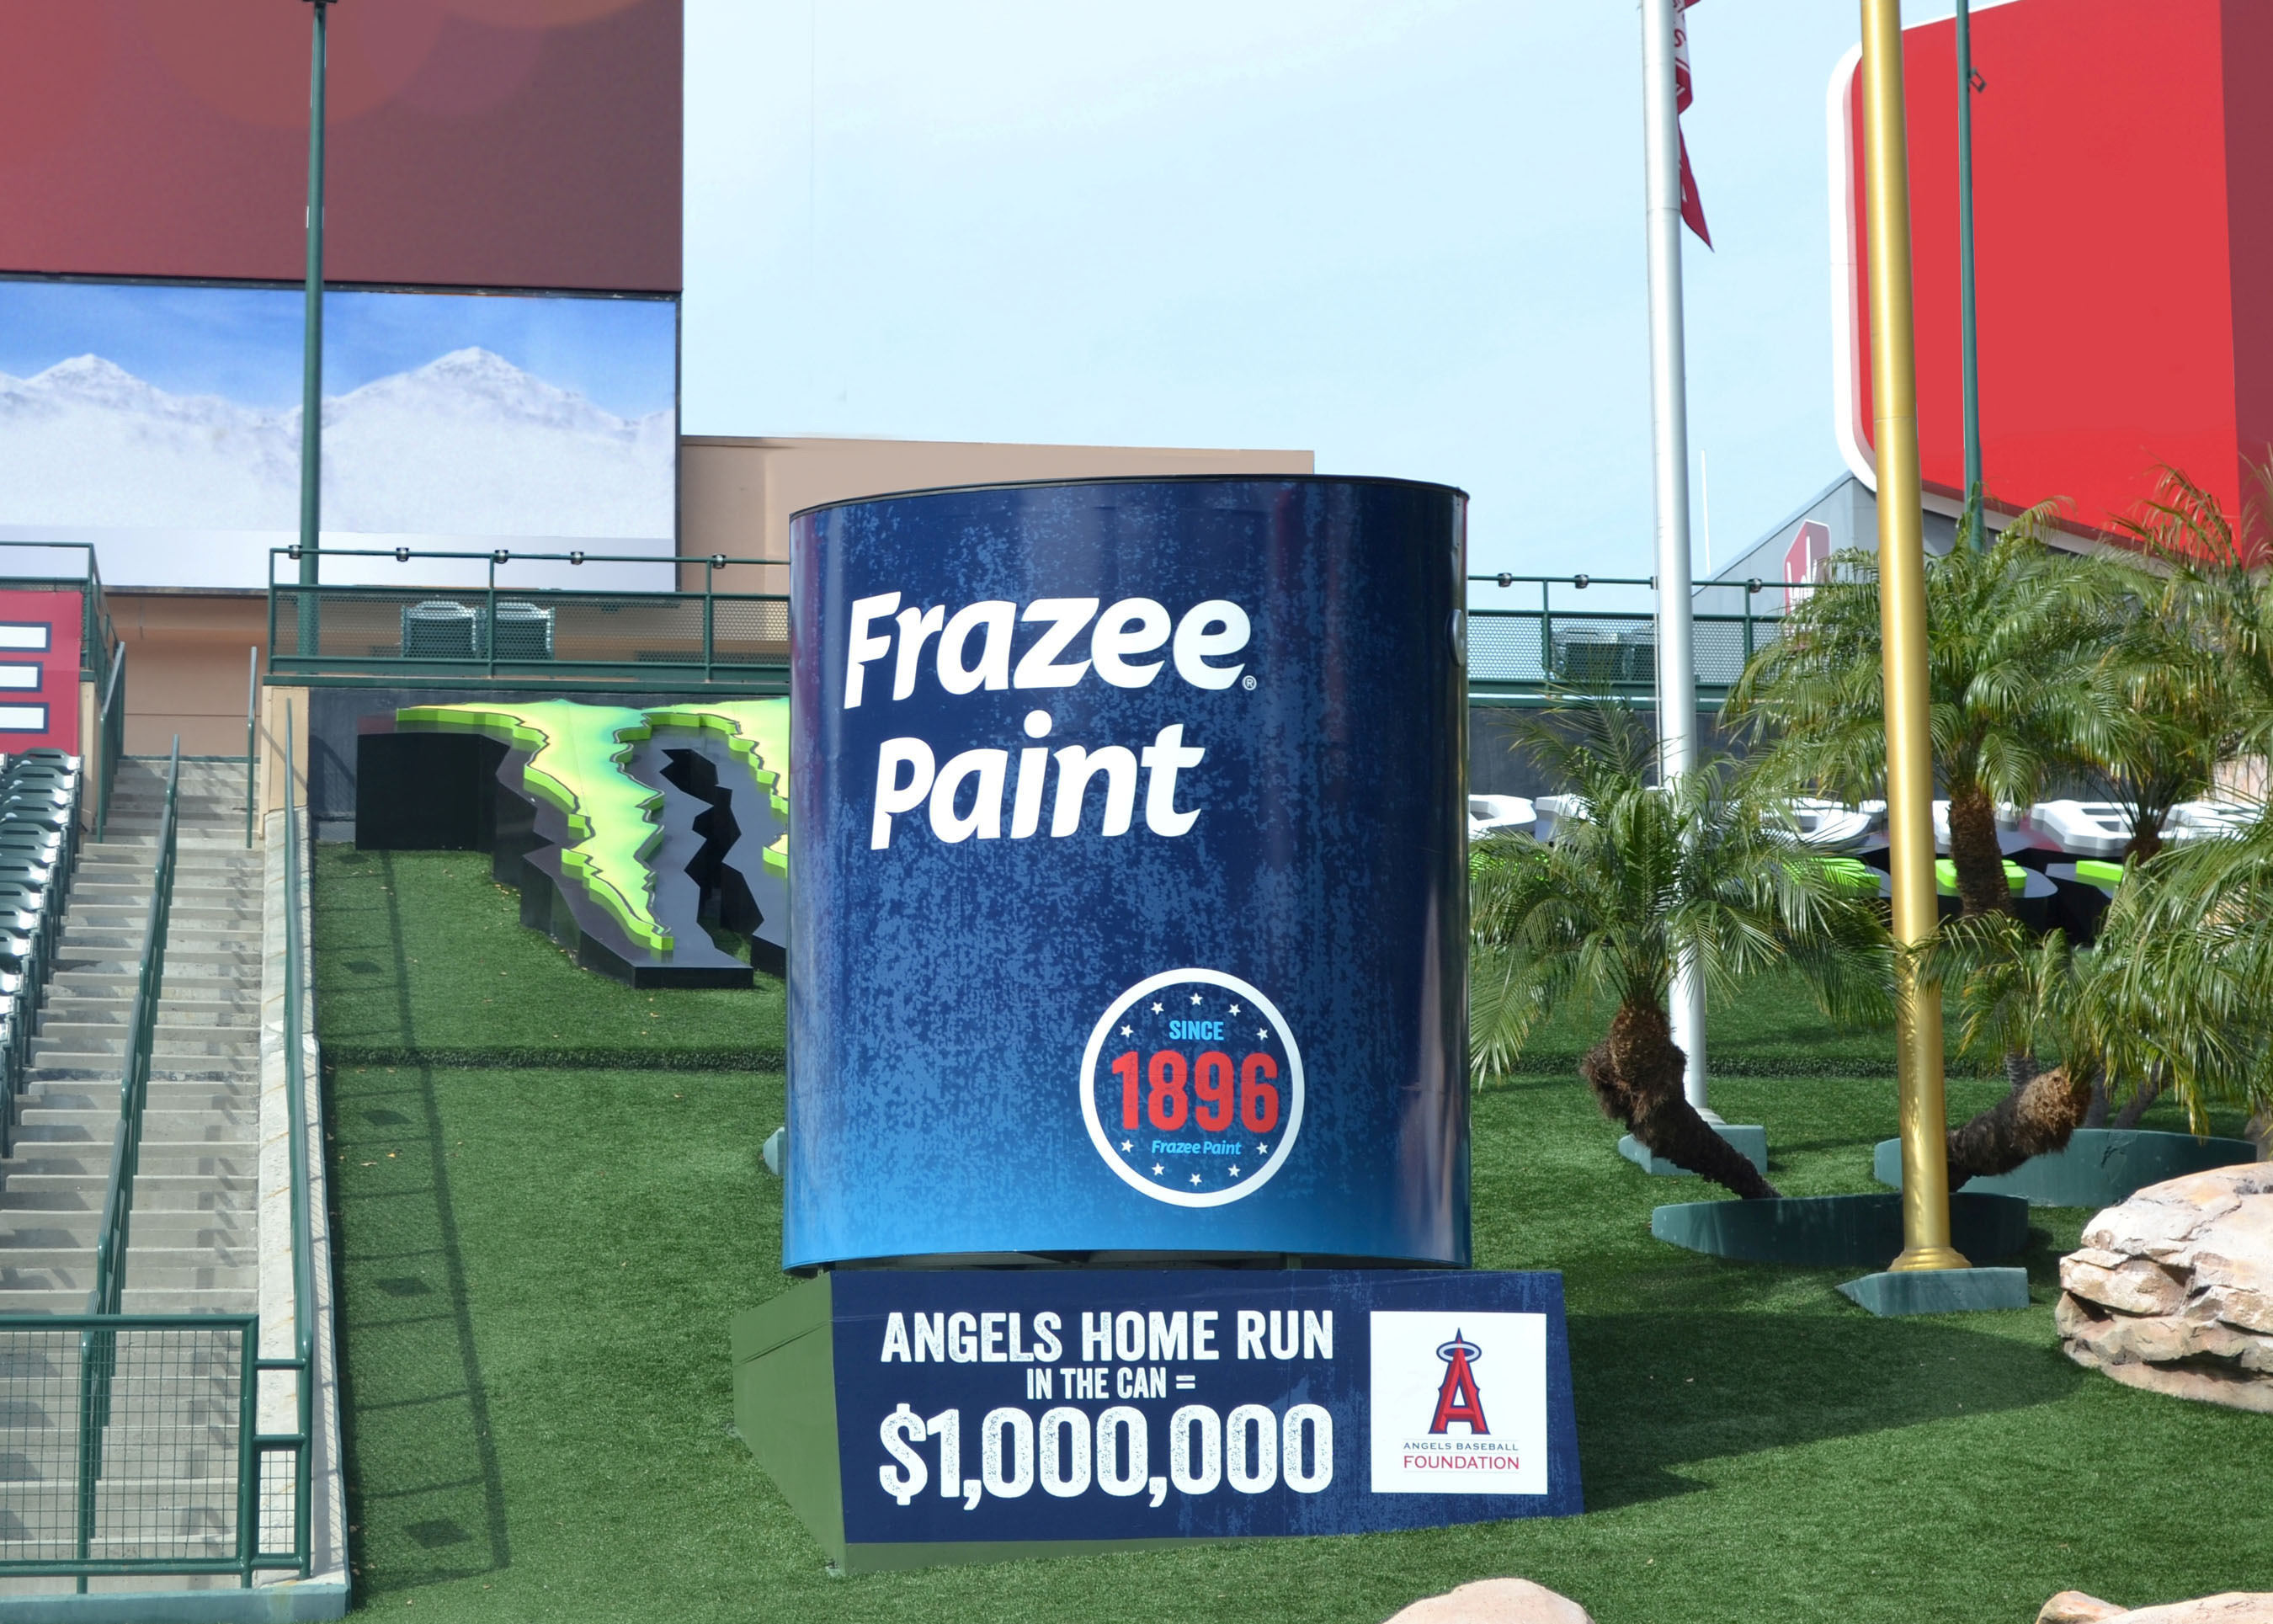 Frazee Paint tosses $1 million home run challenge to Los Angeles Angels to benefit the Angels Baseball Foundation. (PRNewsFoto/Frazee Paint) (PRNewsFoto/FRAZEE PAINT)